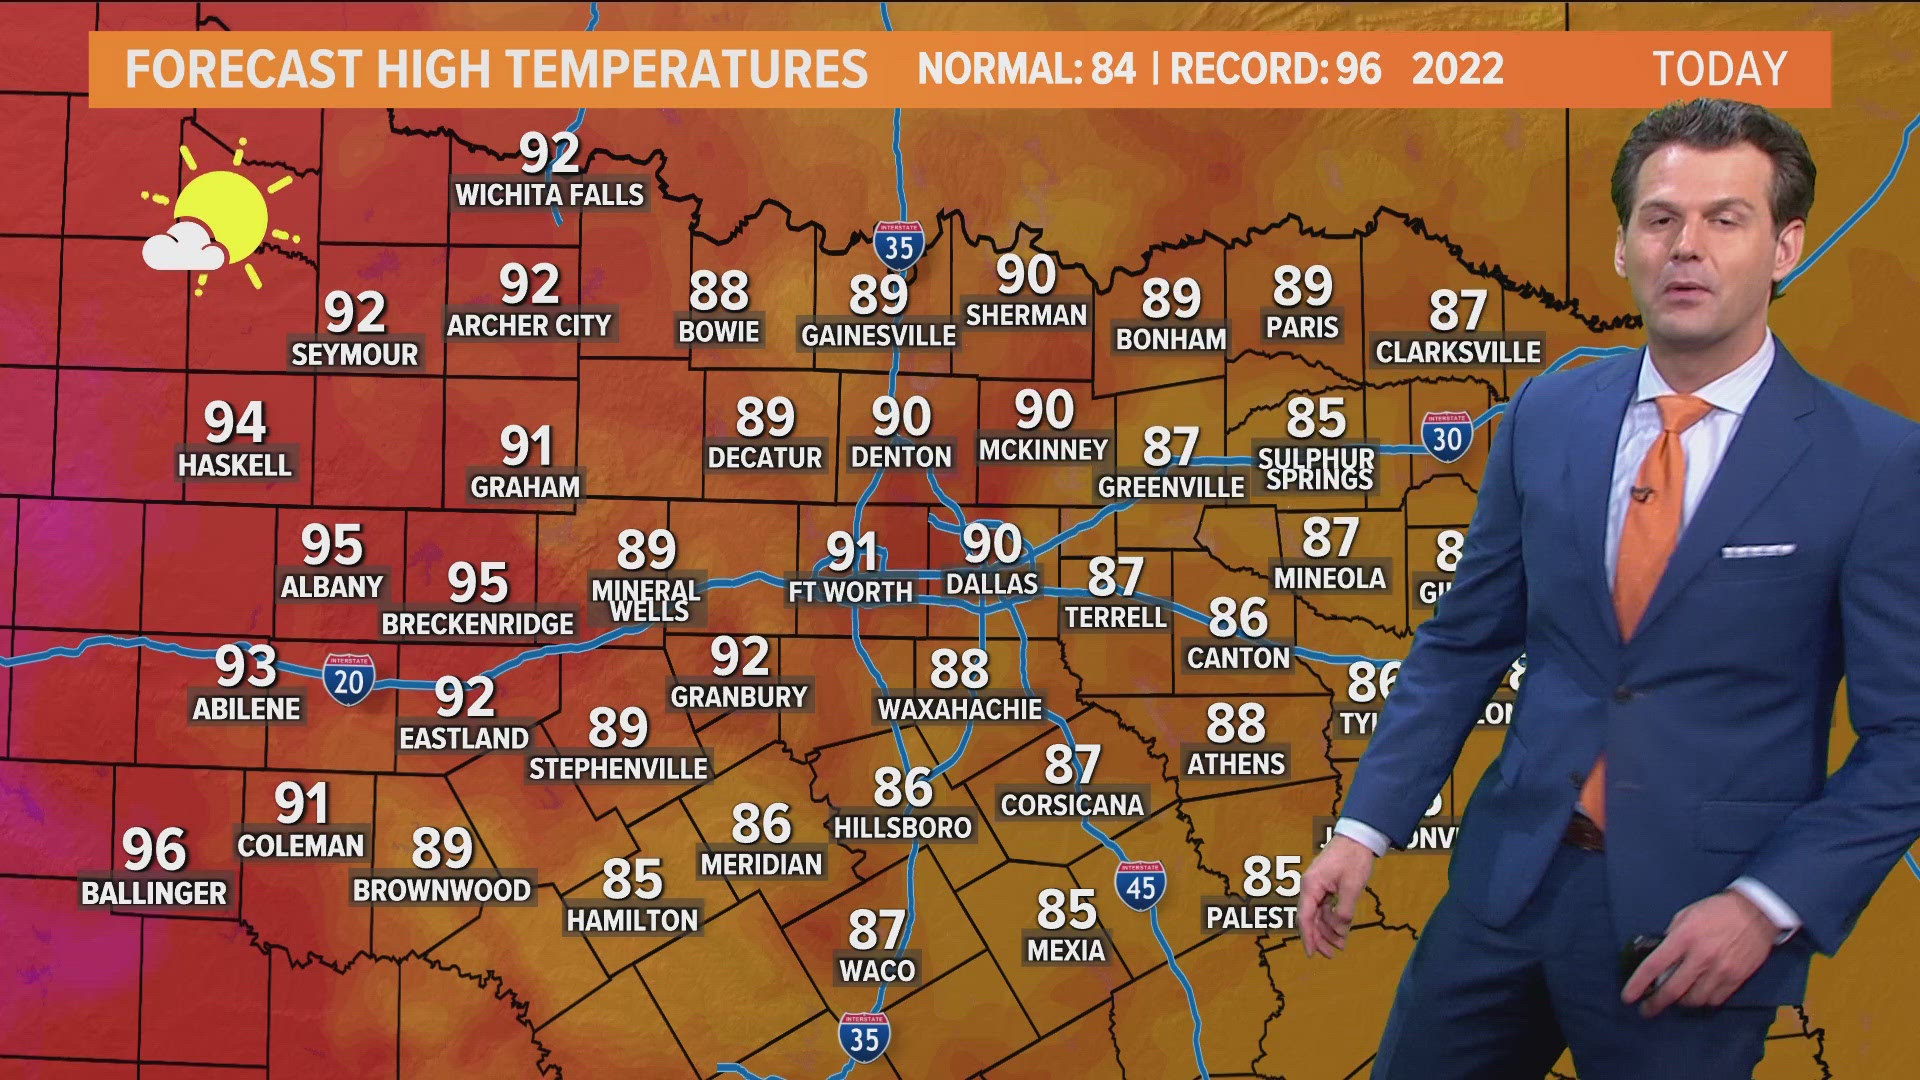 Temperatures are going up after rain moves out of North Texas.